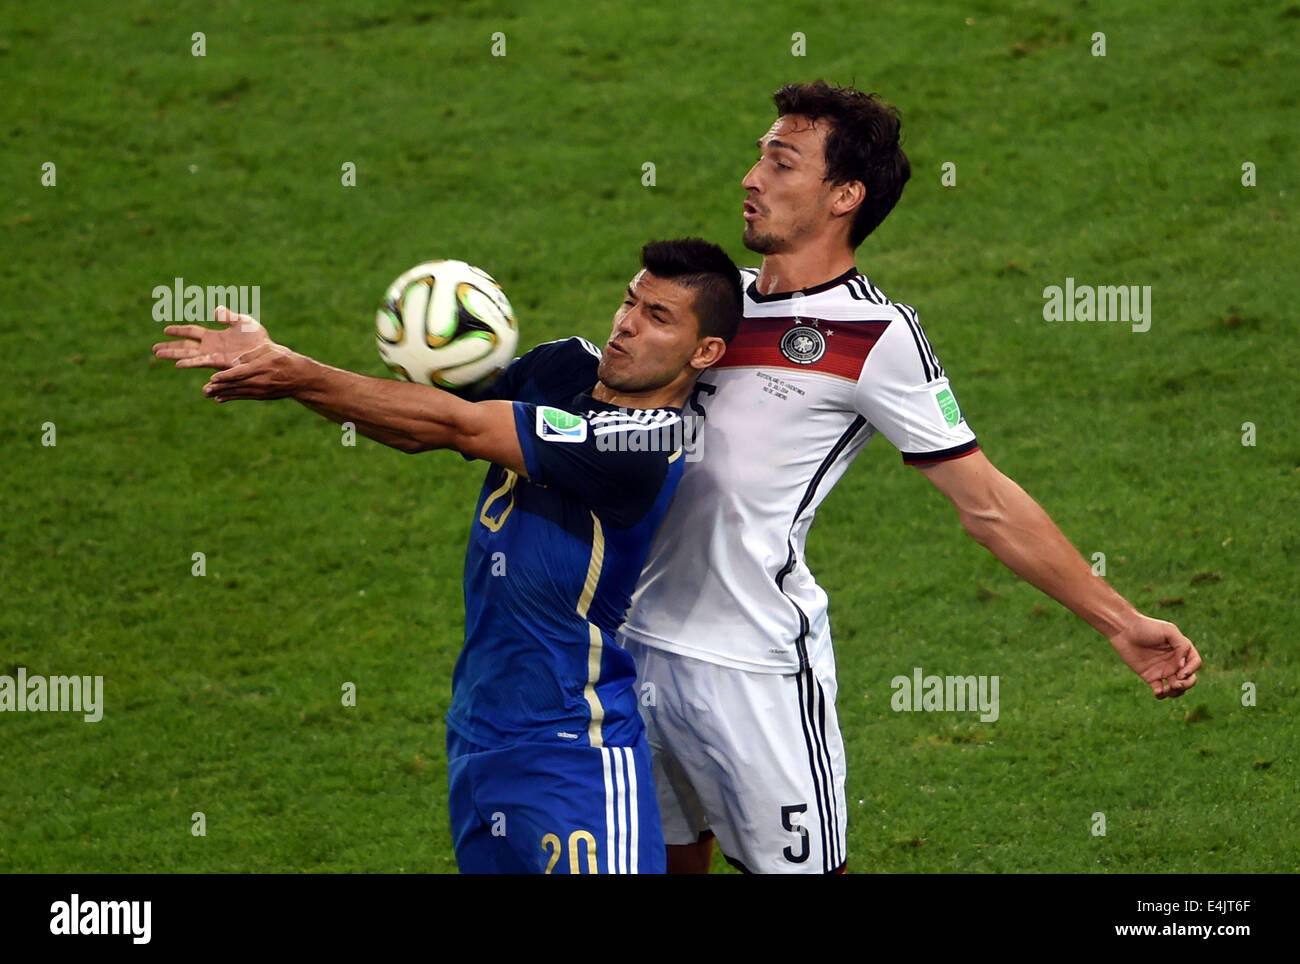 Rio De Janeiro, Brazil. 13th July, 2014. Germany's Mats Hummels vies with Argentina's Sergio Aguero during the final match between Germany and Argentina of 2014 FIFA World Cup at the Estadio do Maracana Stadium in Rio de Janeiro, Brazil, on July 13, 2014. Credit:  Li Ga/Xinhua/Alamy Live News Stock Photo